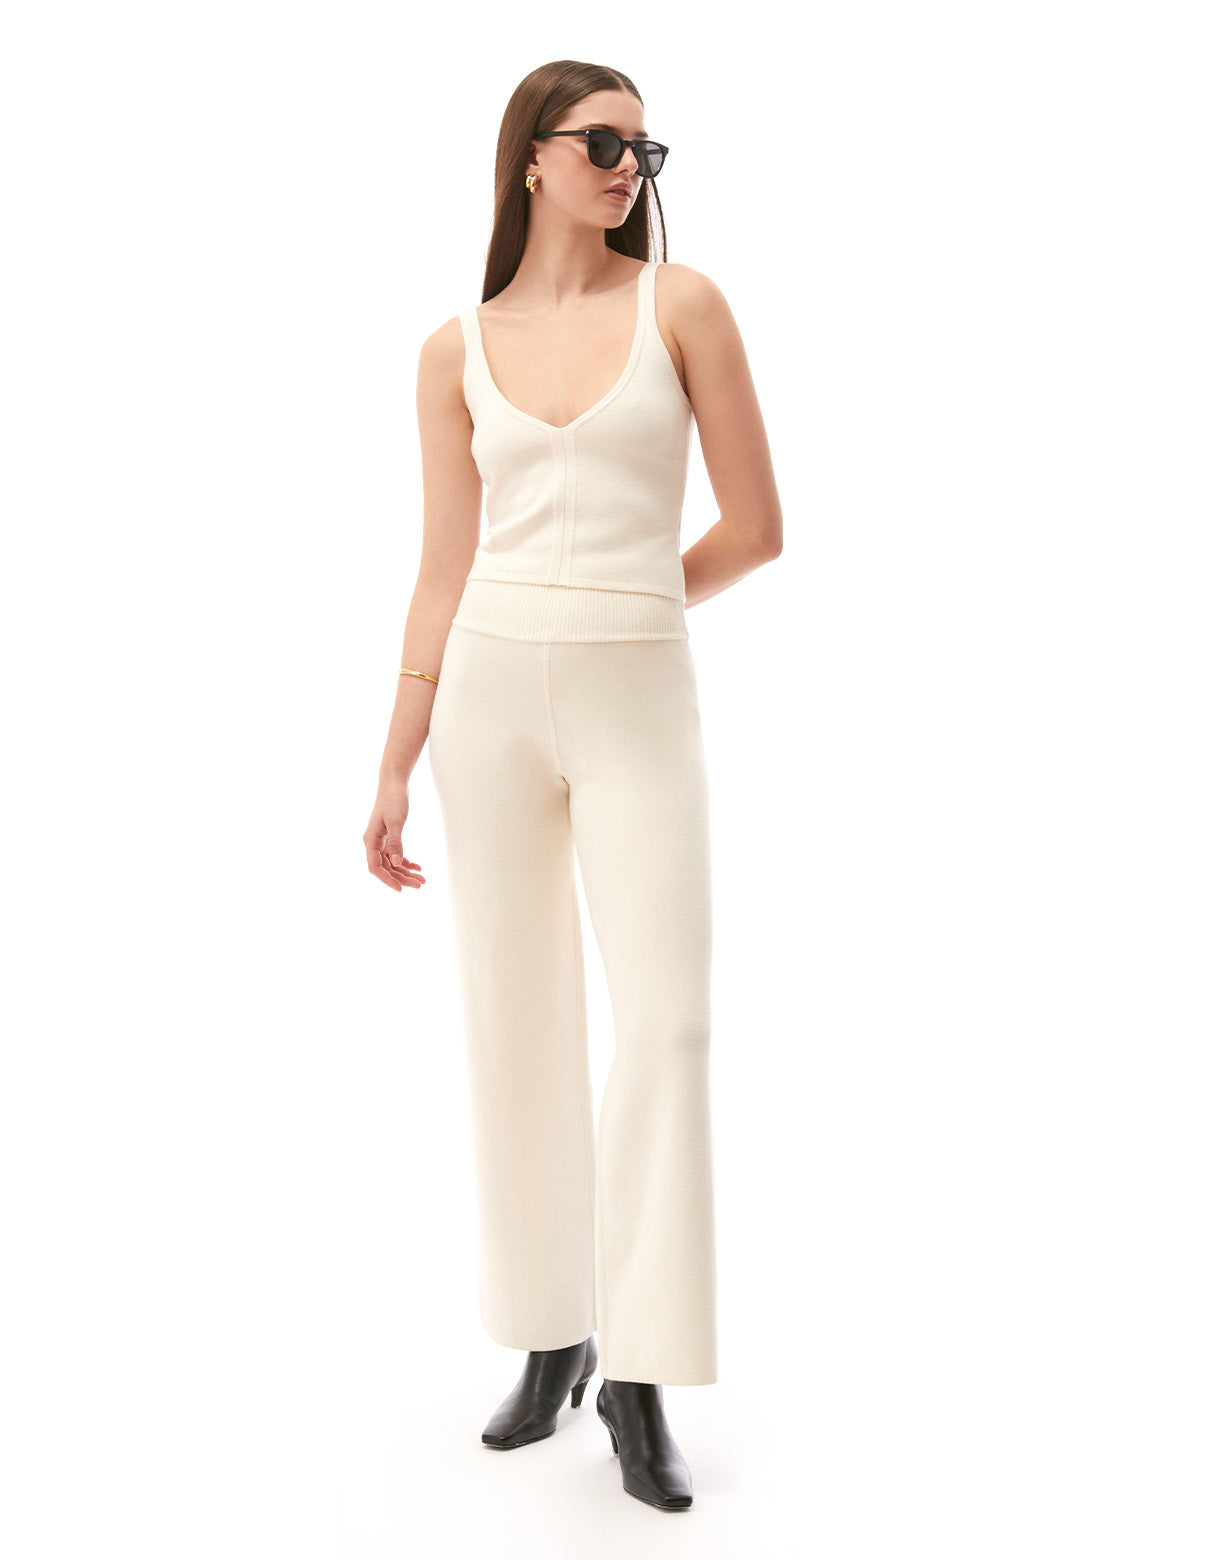 marla boot cut pant pull on knit off white cream - flattering designer fashion summer vacation cruisewear pants for women